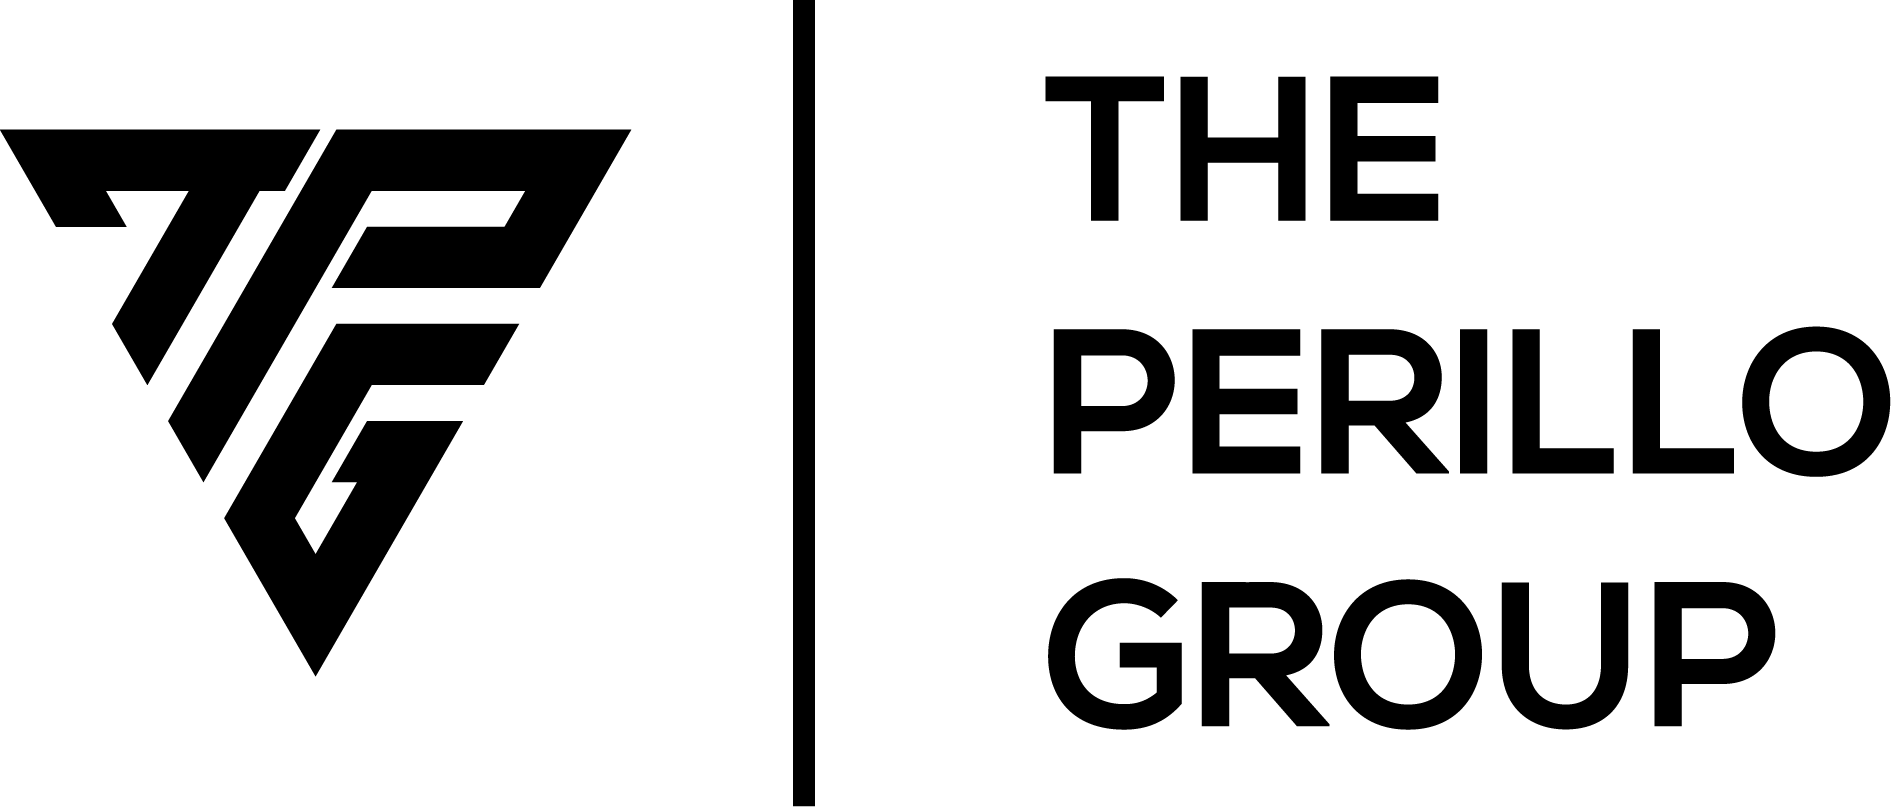 The Perillo Group Professional Staffing Nationwide Logo